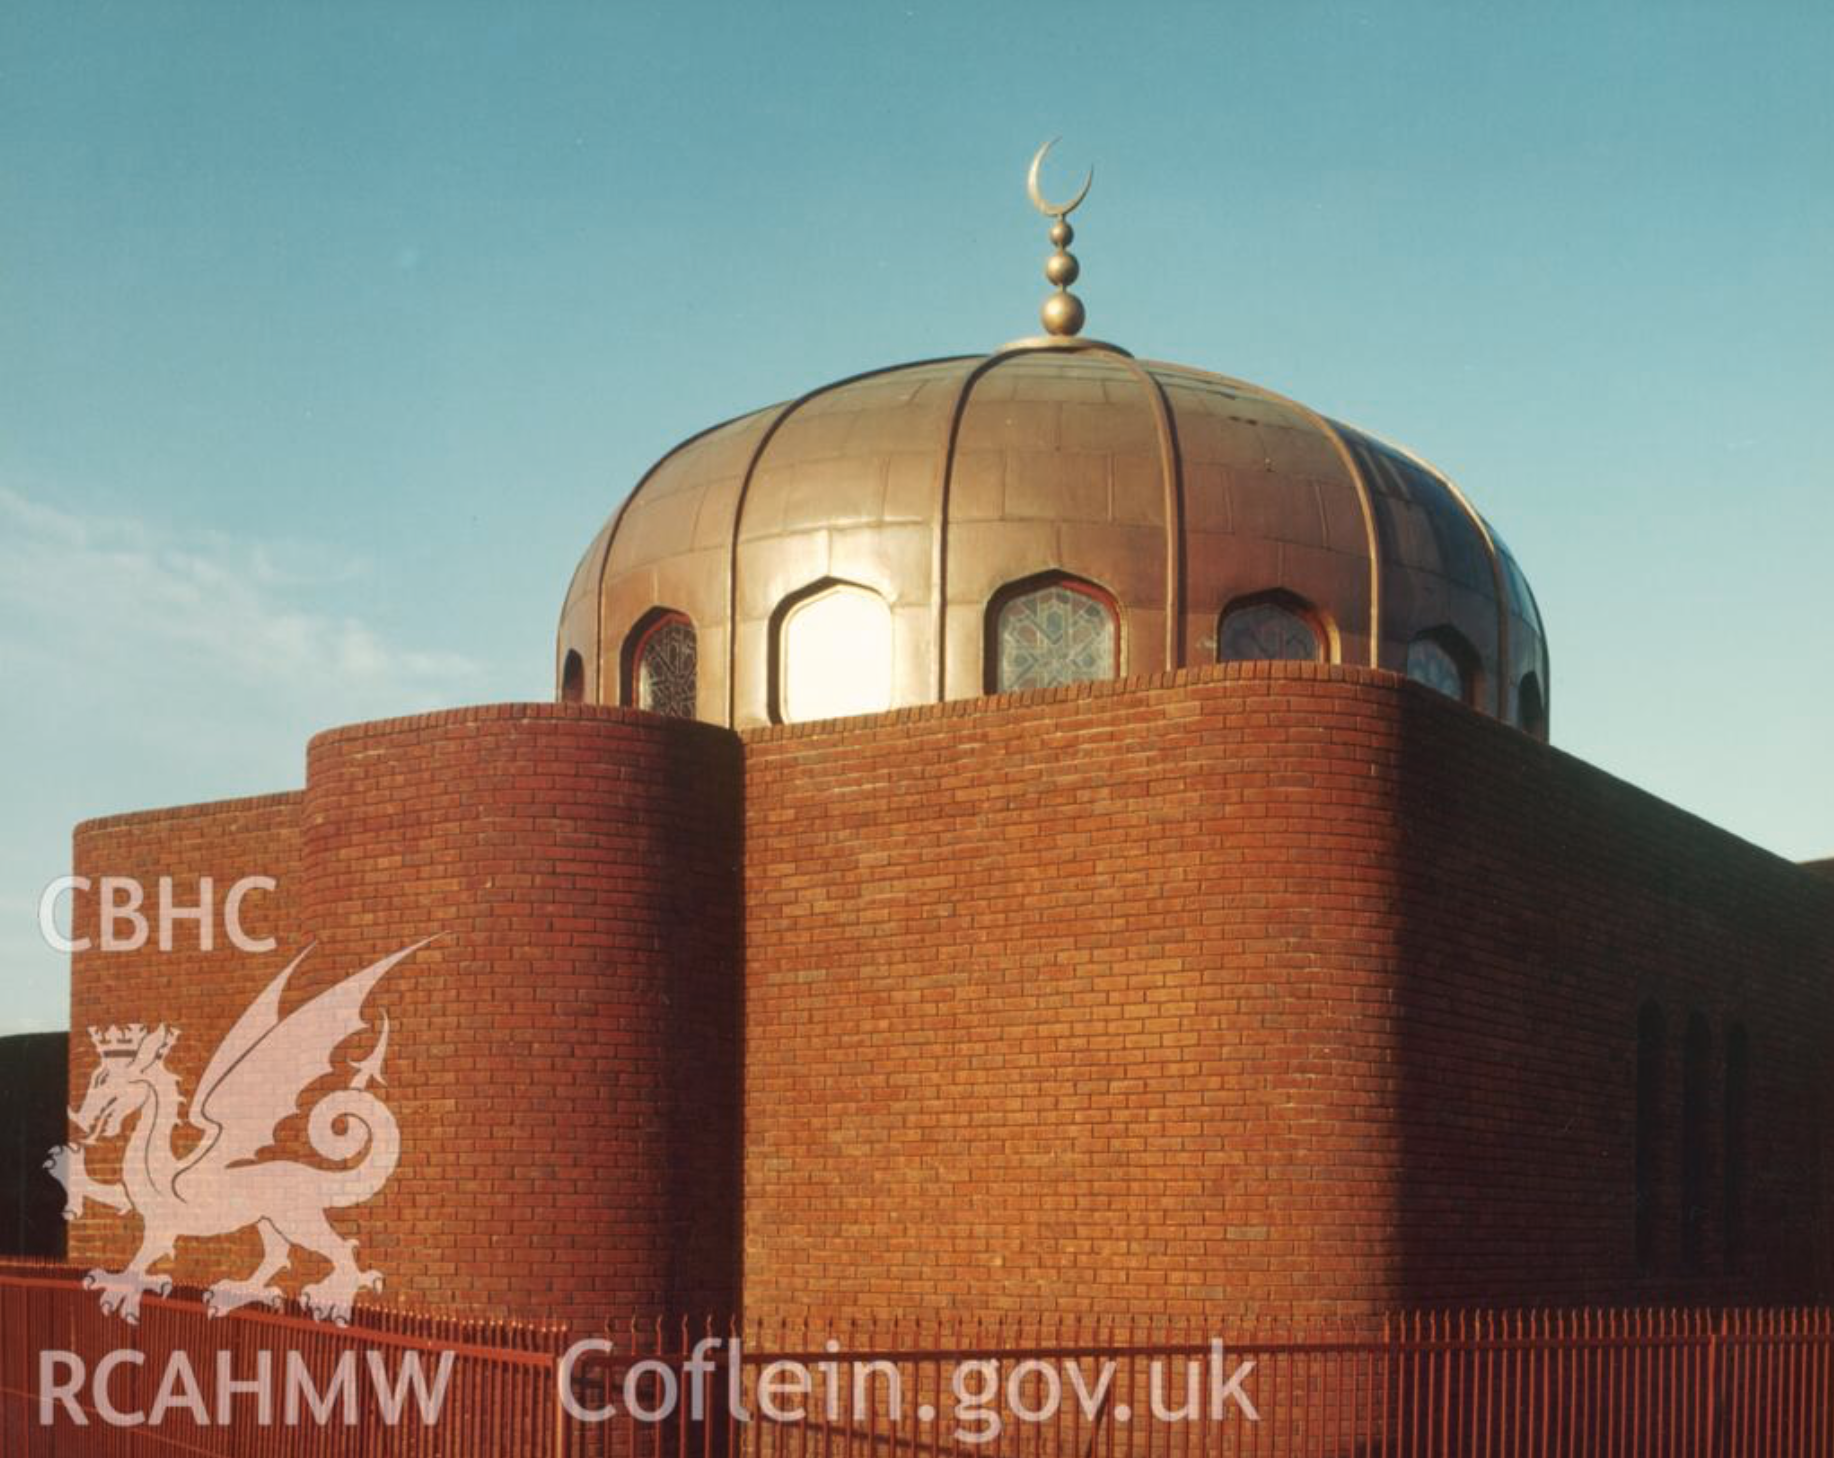 South Wales Islamic Centre